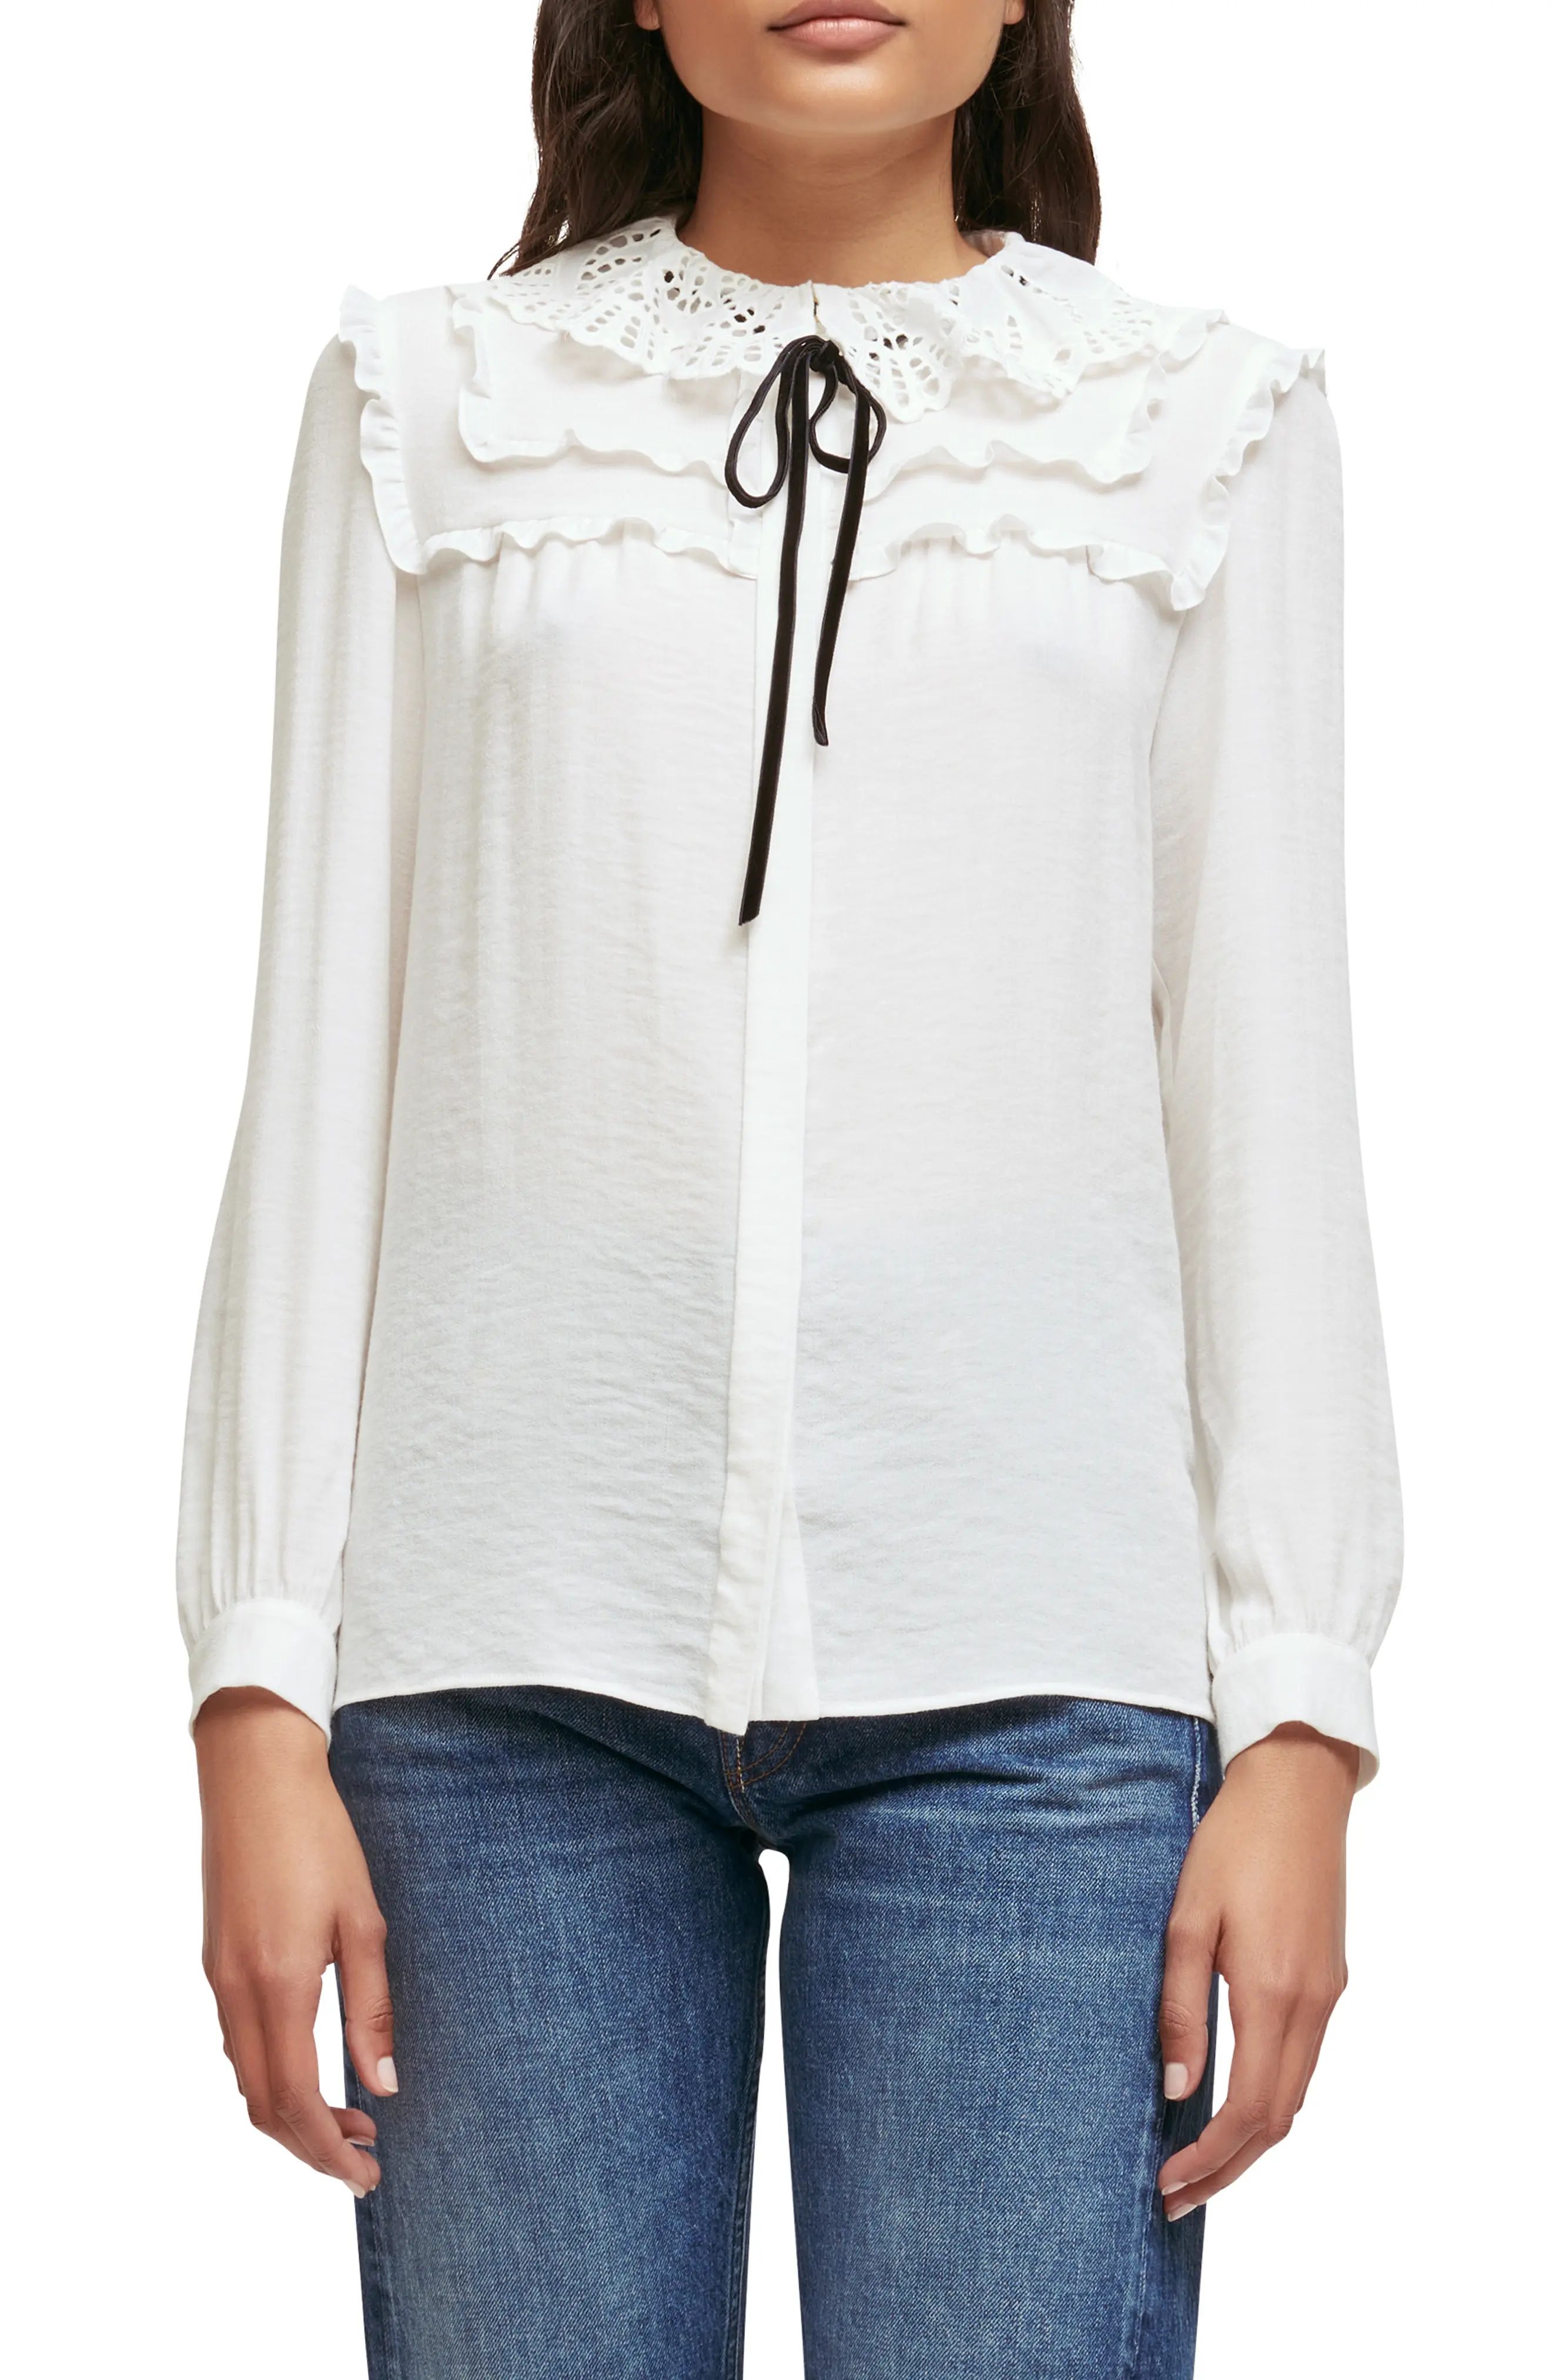 maje 121Come Long Sleeve Blouse in White at Nordstrom | Nordstrom